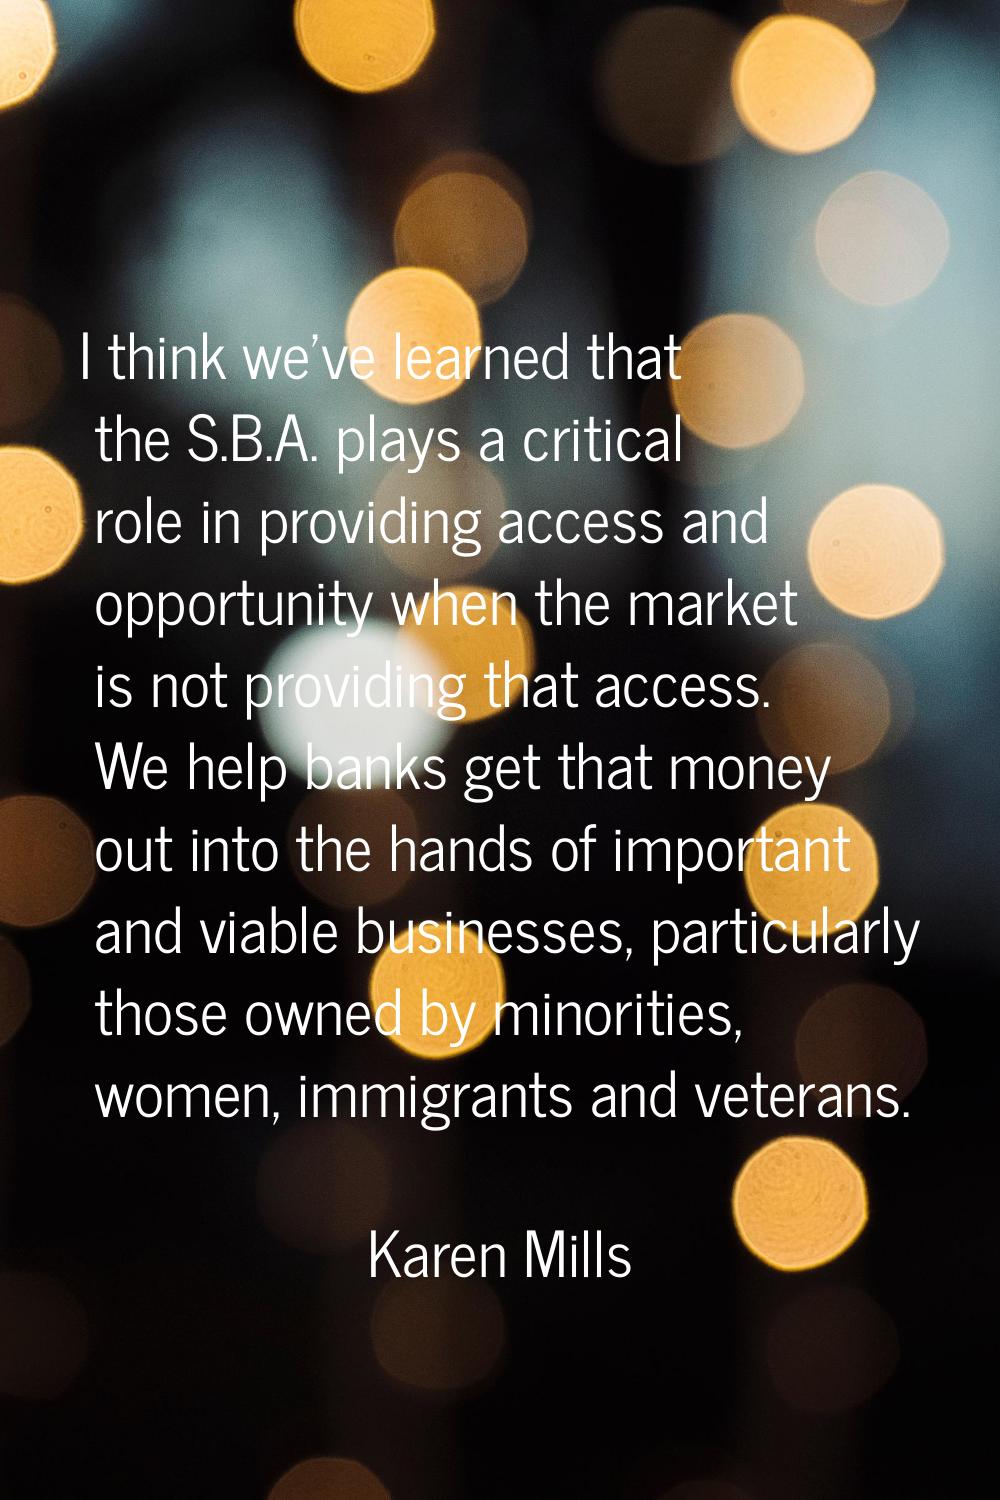 I think we've learned that the S.B.A. plays a critical role in providing access and opportunity whe